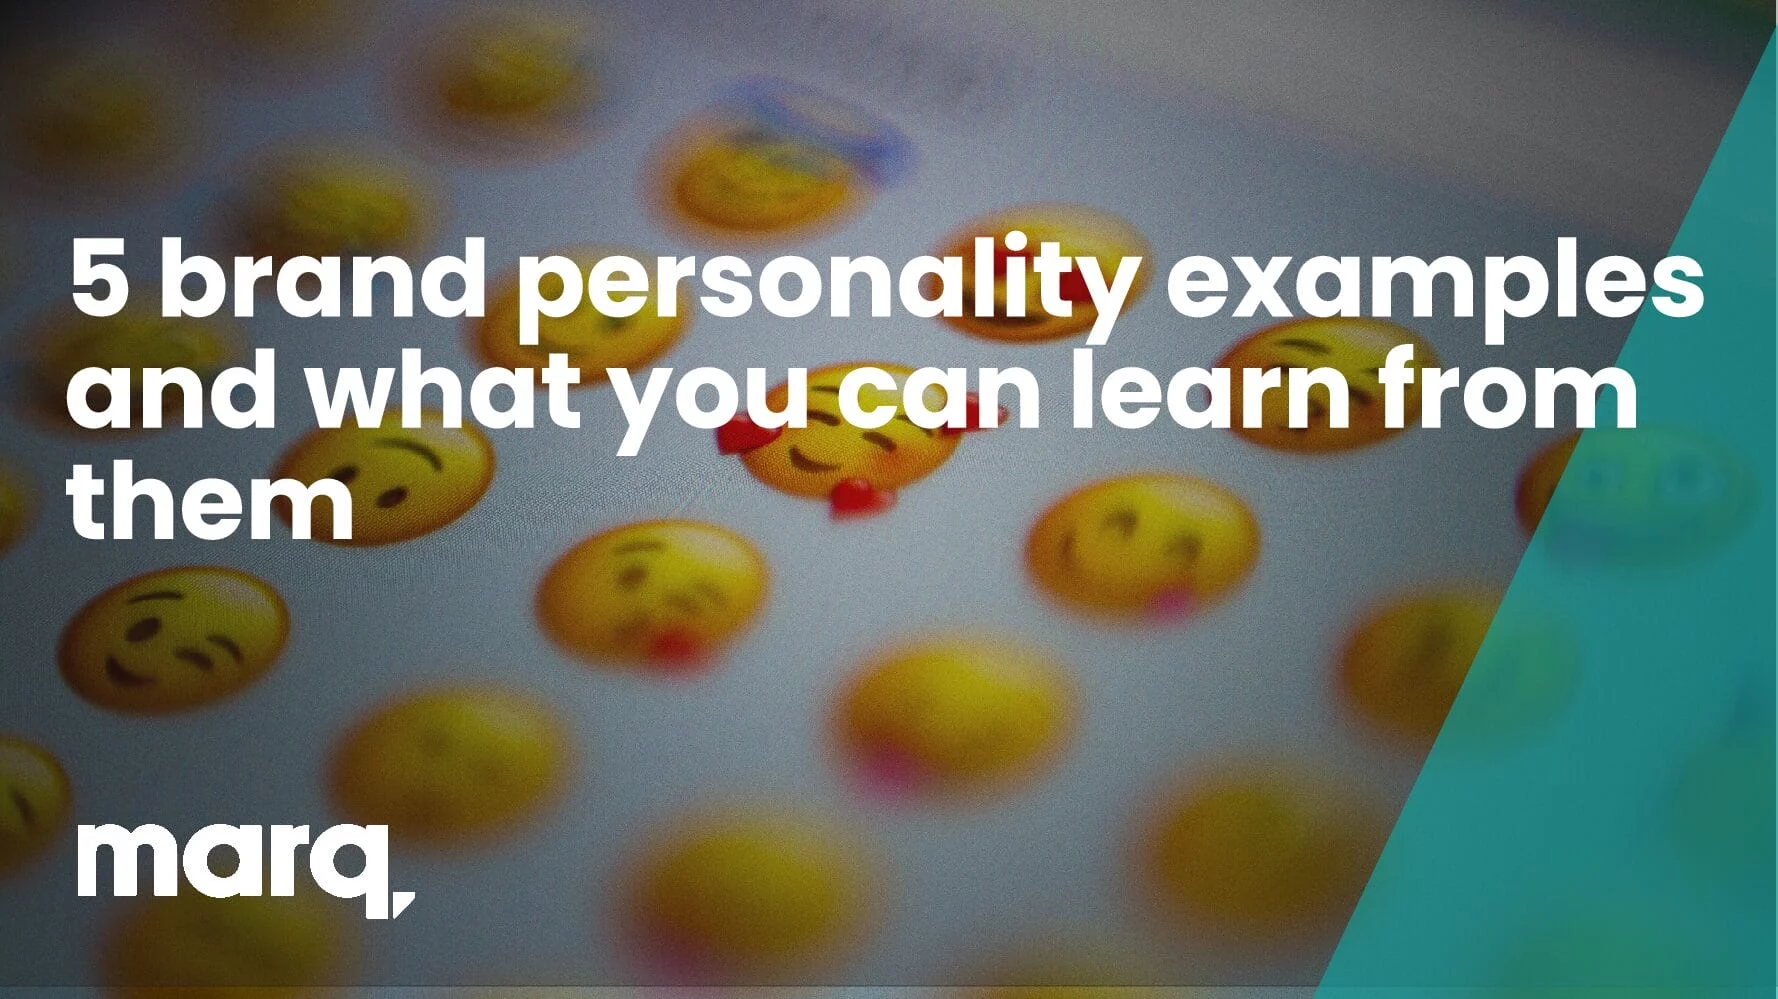 5 brand personality examples and what you can learn from them